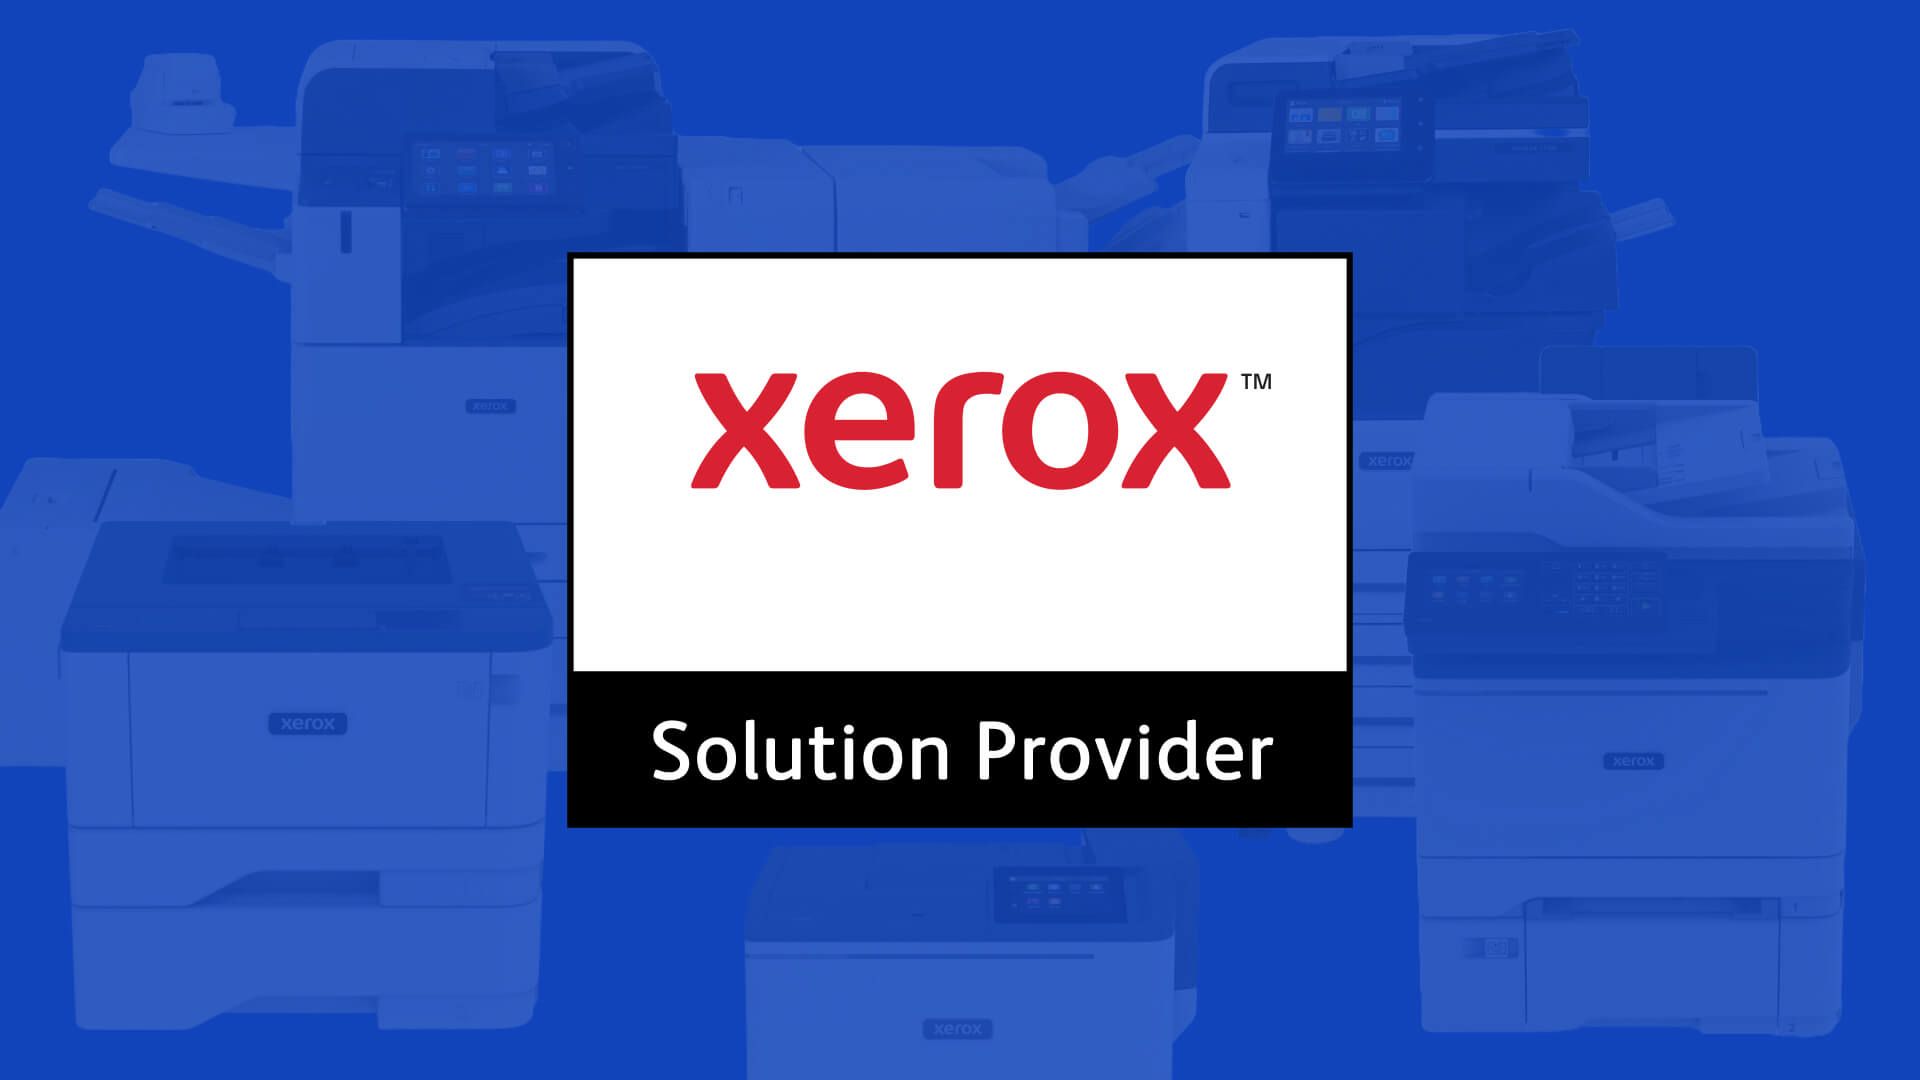 The xerox solution provider logo is on a blue background.